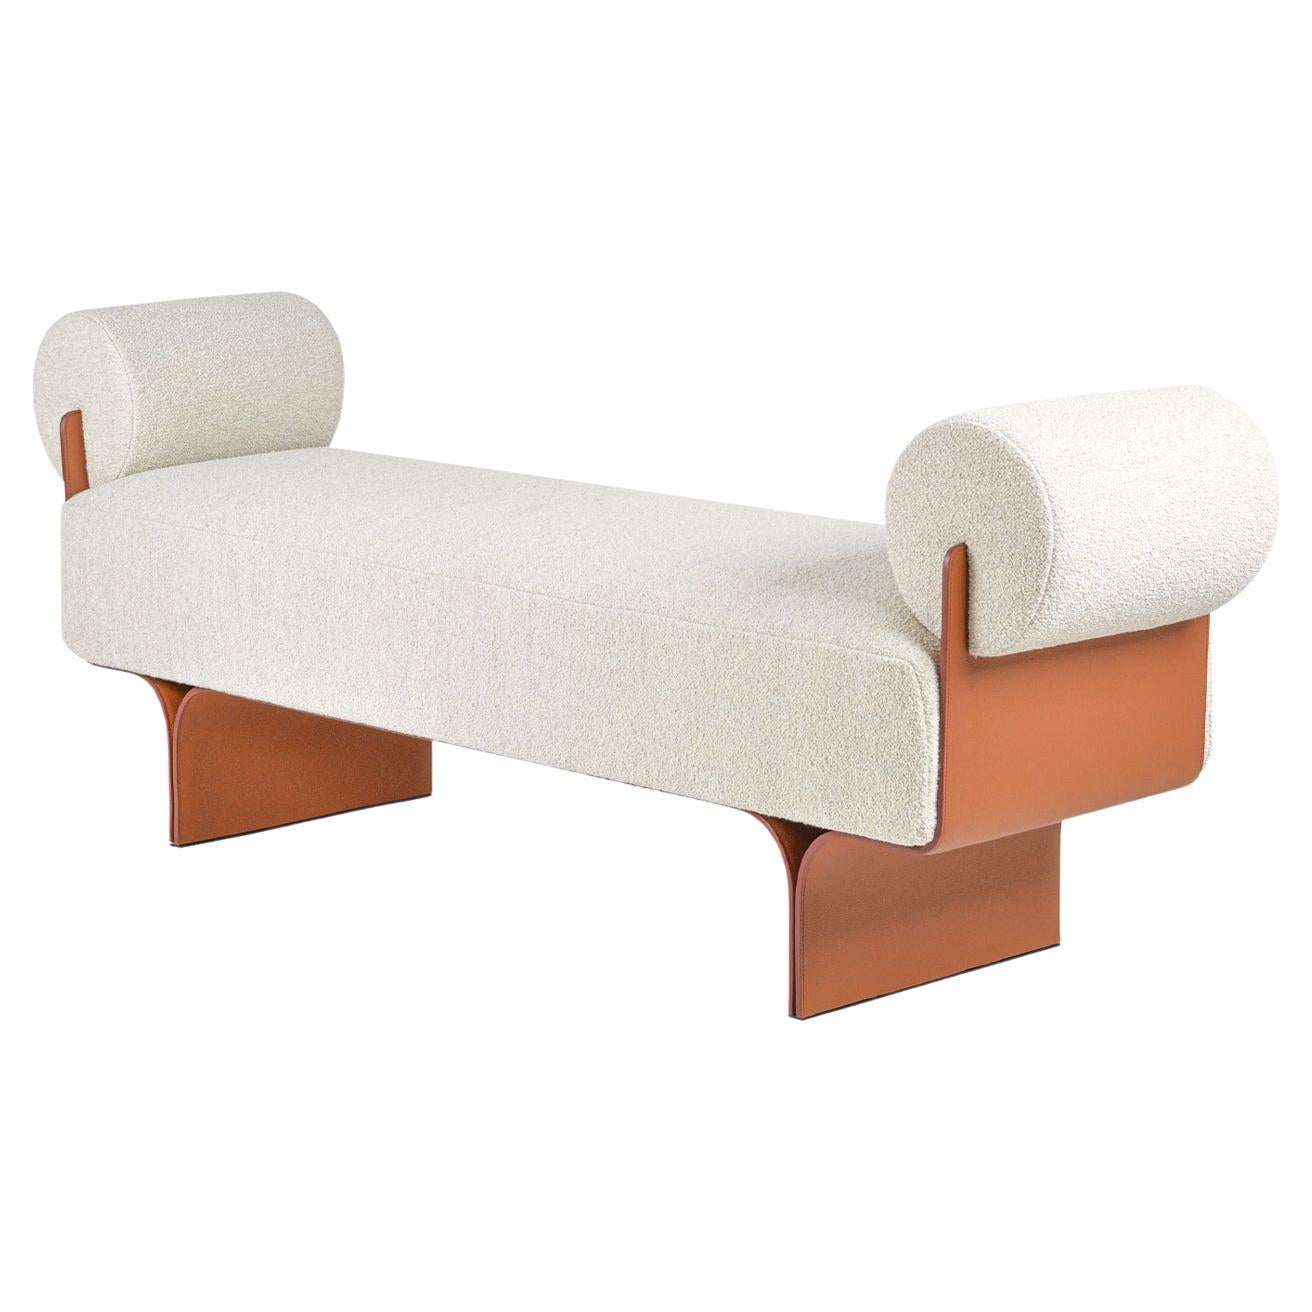 Pierre Bench, Upholstery in Fabric, Iron Structure Lined in Leather, Two Seats